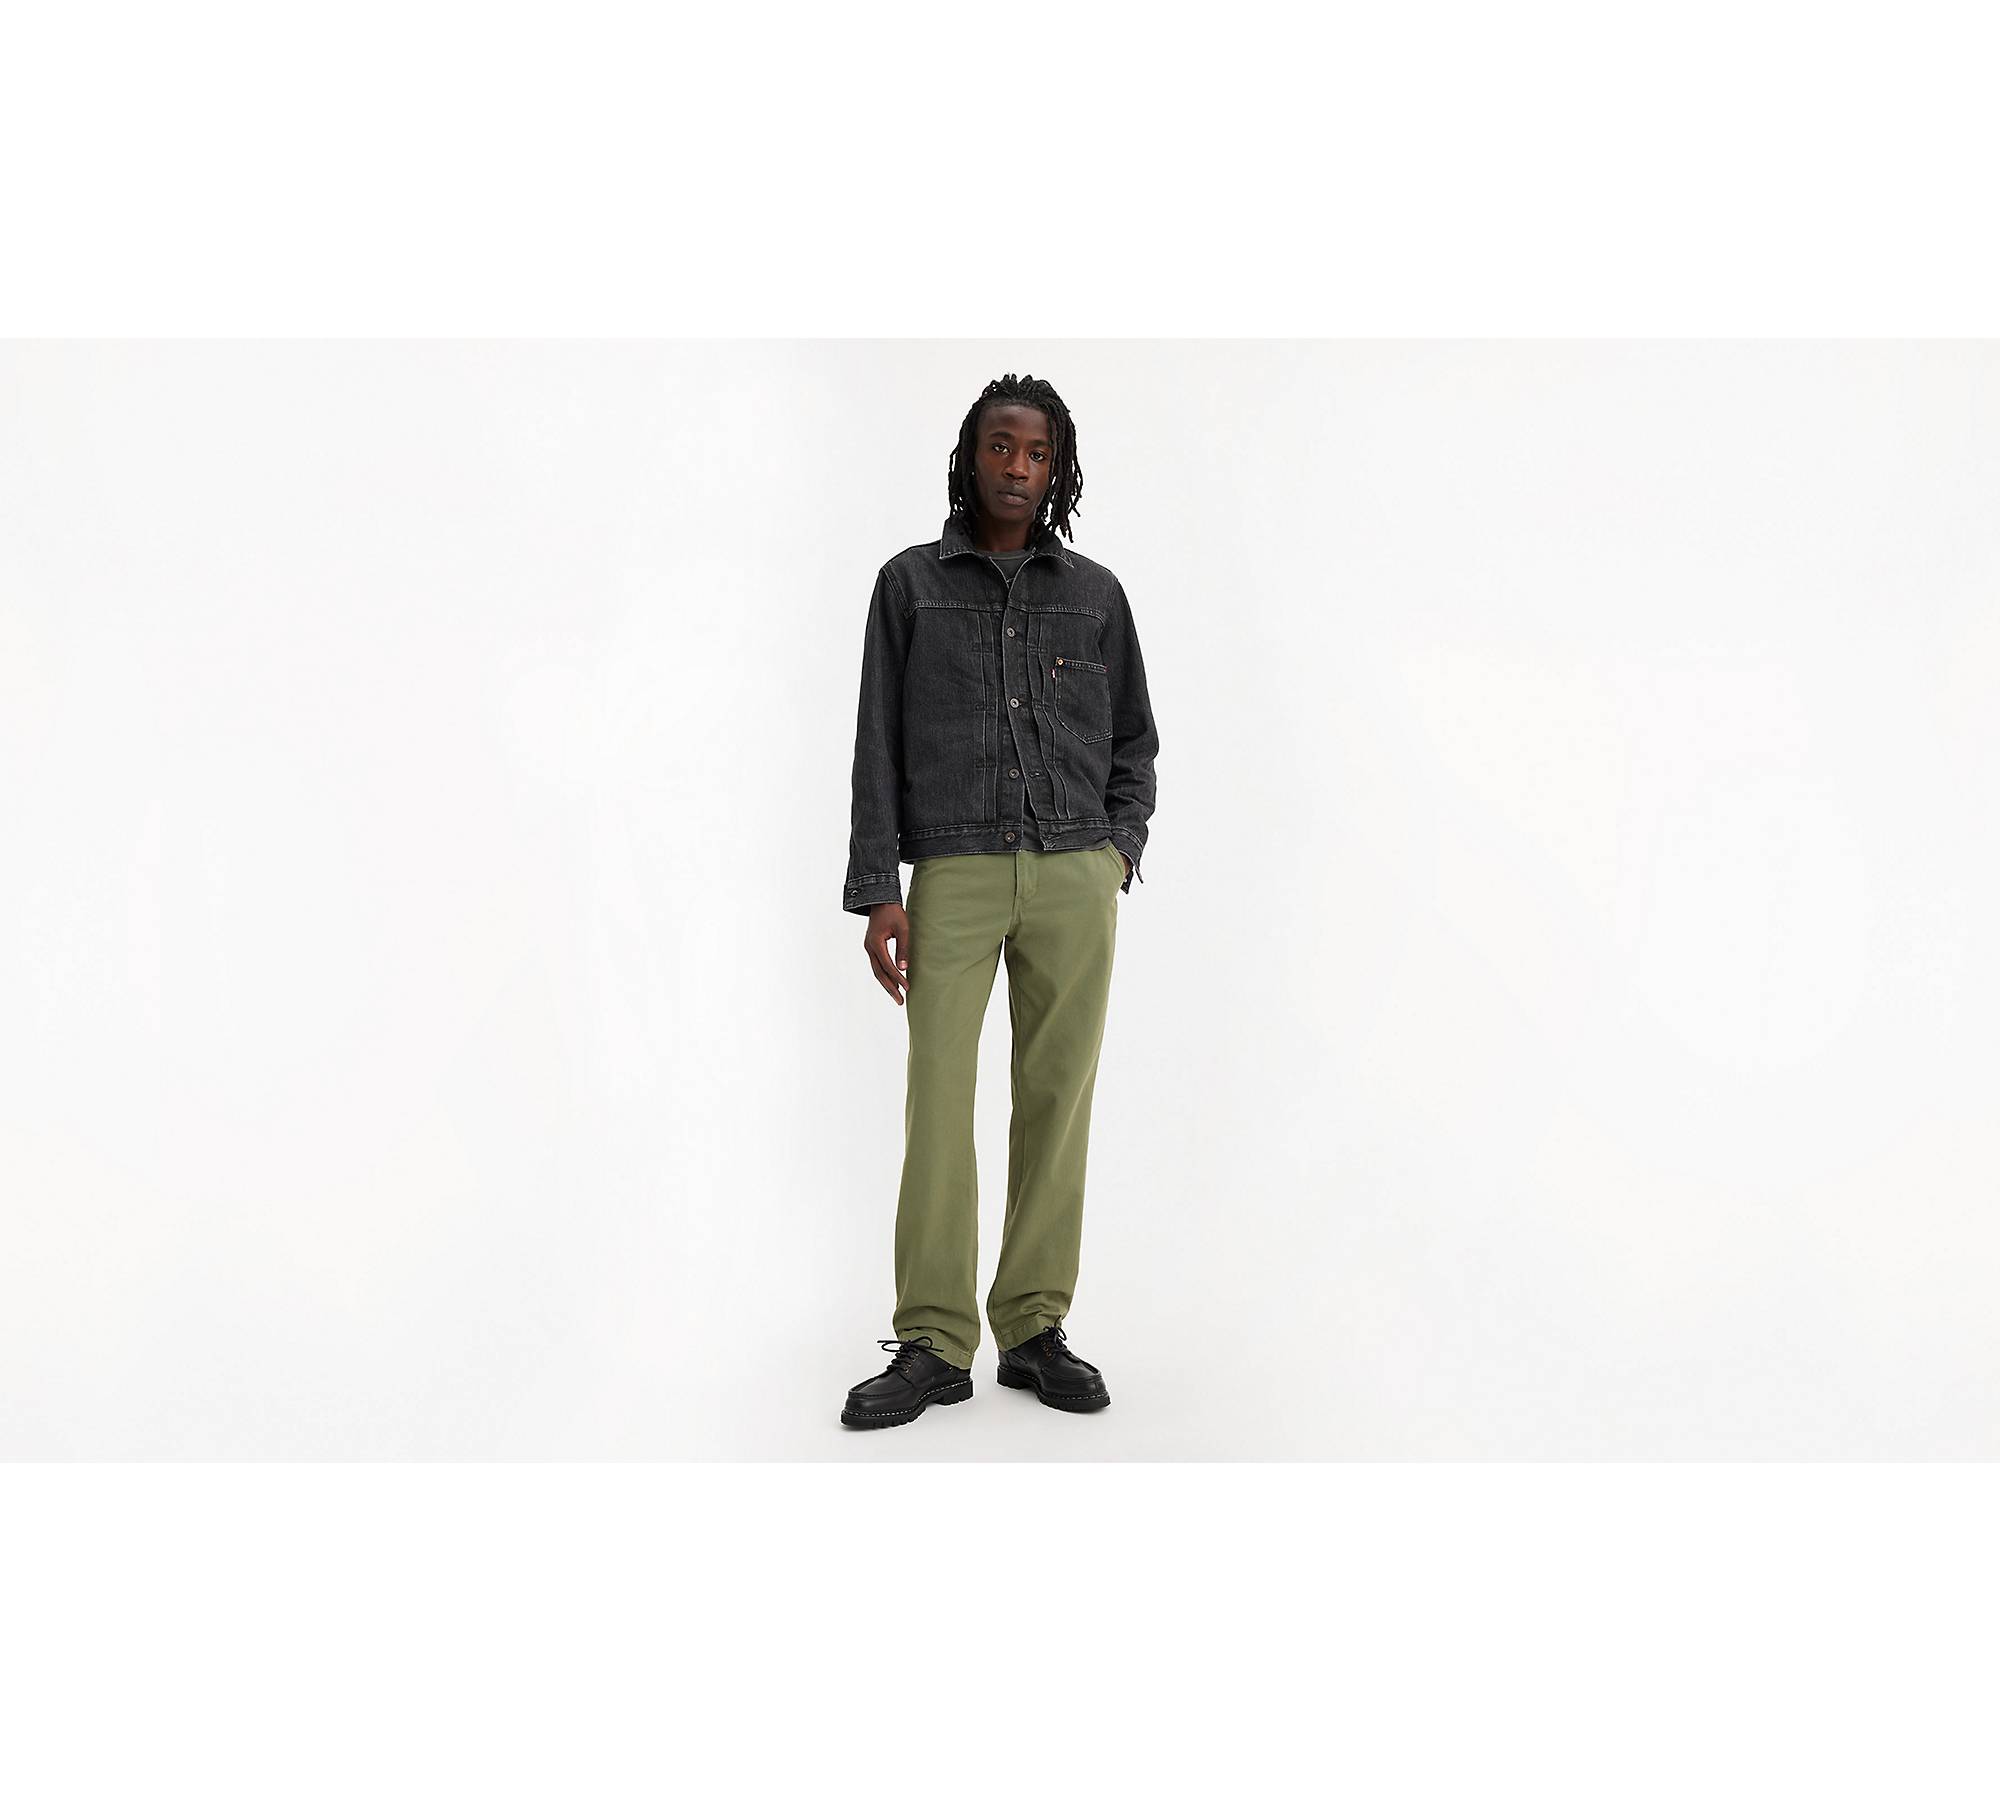 Levi's® XX Chino Authentic Straight Pants - Levi's Jeans, Jackets & Clothing